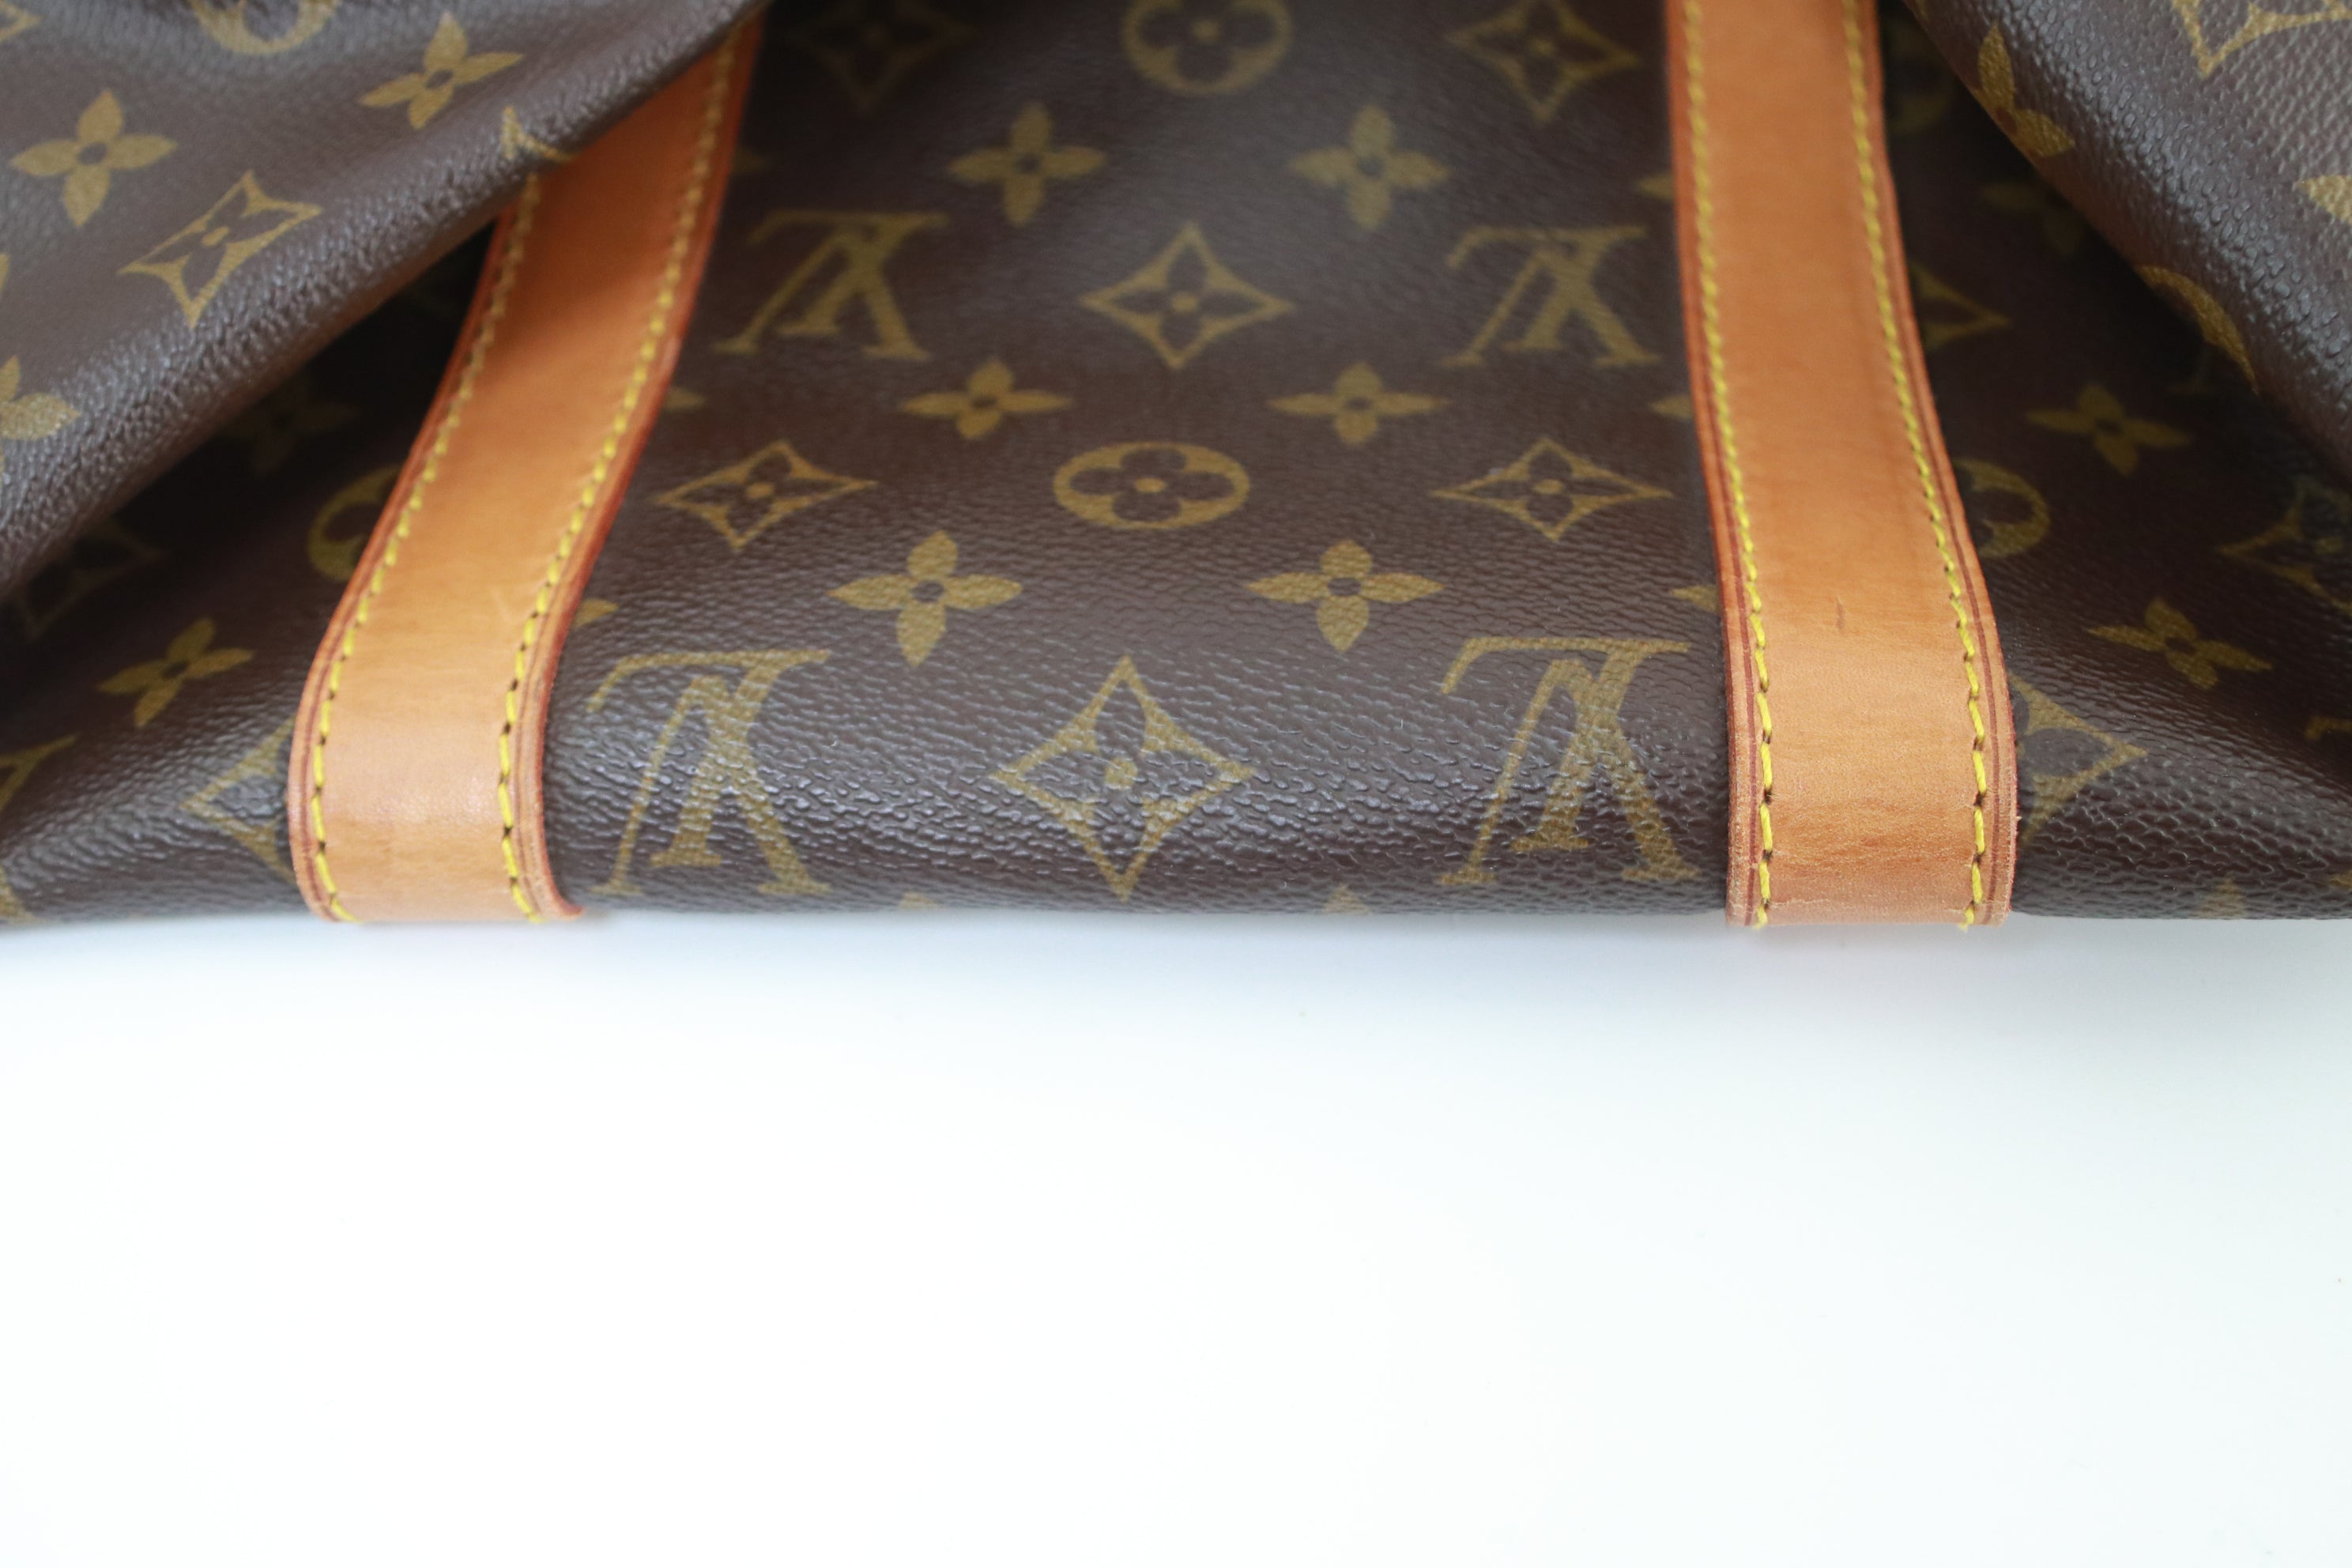 Buy Louis Vuitton monogram LOUIS VUITTON Keepall 50 Monogram M41426 Boston  Bag Brown / 250901 [Used] from Japan - Buy authentic Plus exclusive items  from Japan